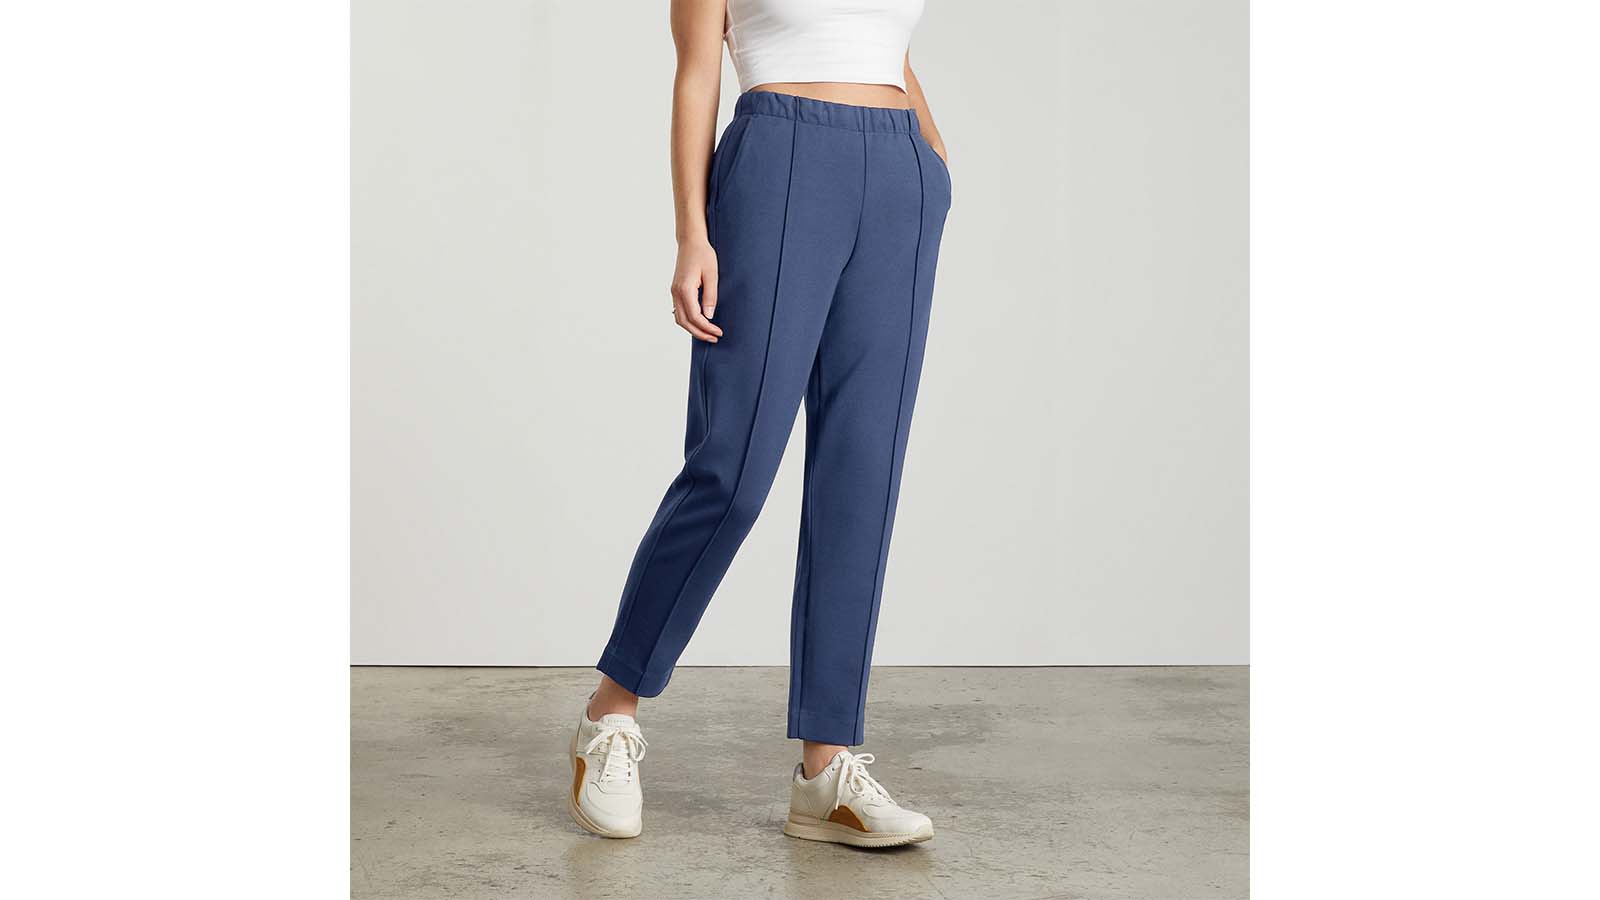 7 Great Travel Pants for Women That Are Actually Stylish - AFAR